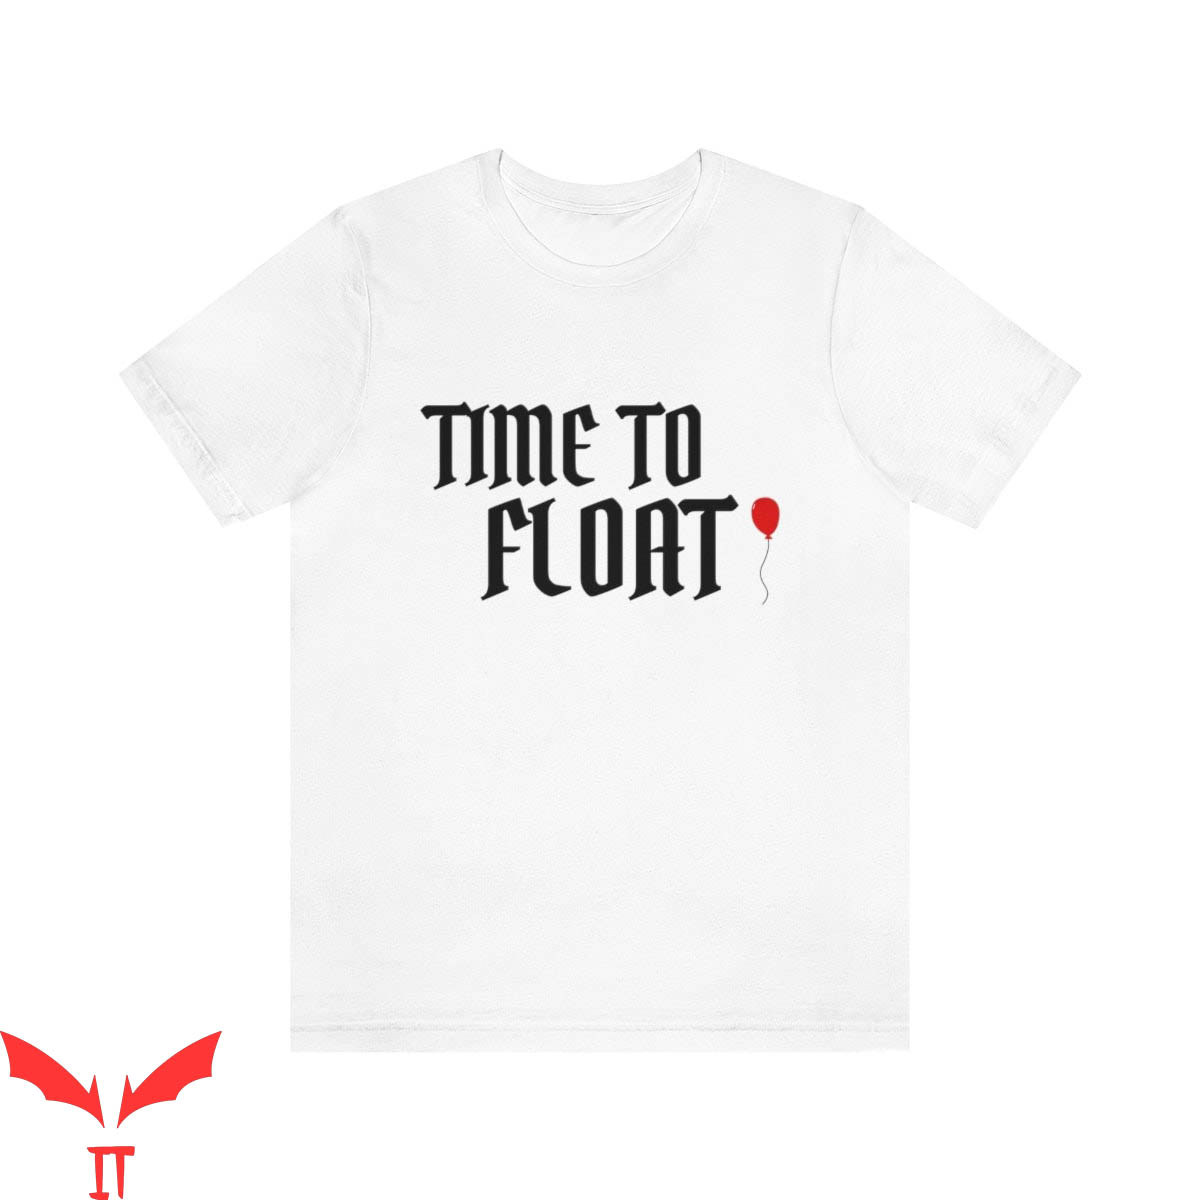 We All Float Down Here T-Shirt Time To Float Scary Clown